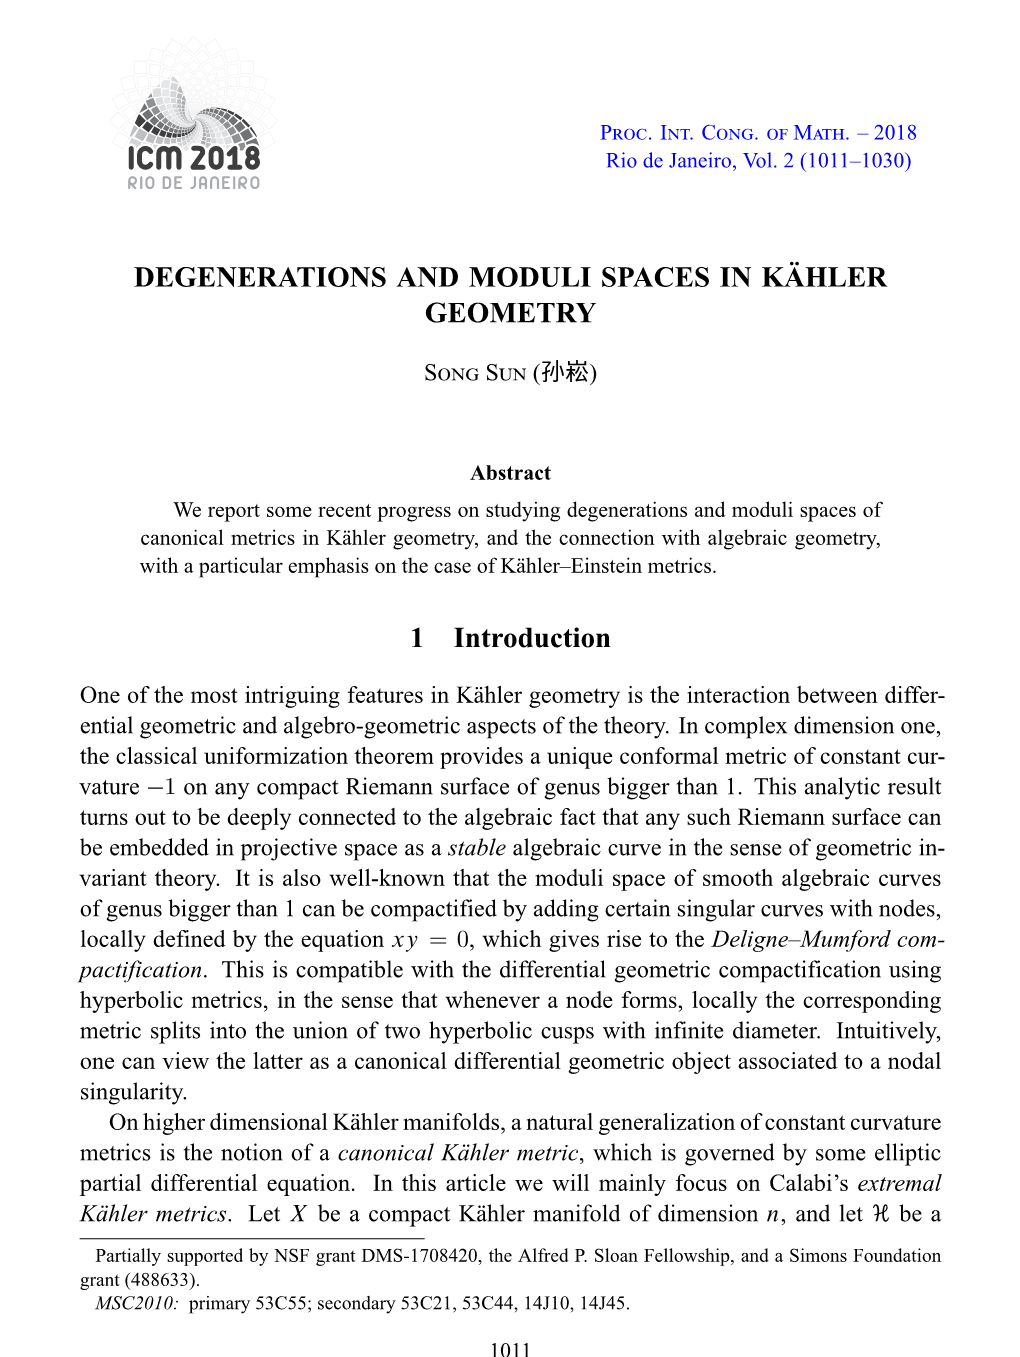 Degenerations and Moduli Spaces in Kähler Geometry